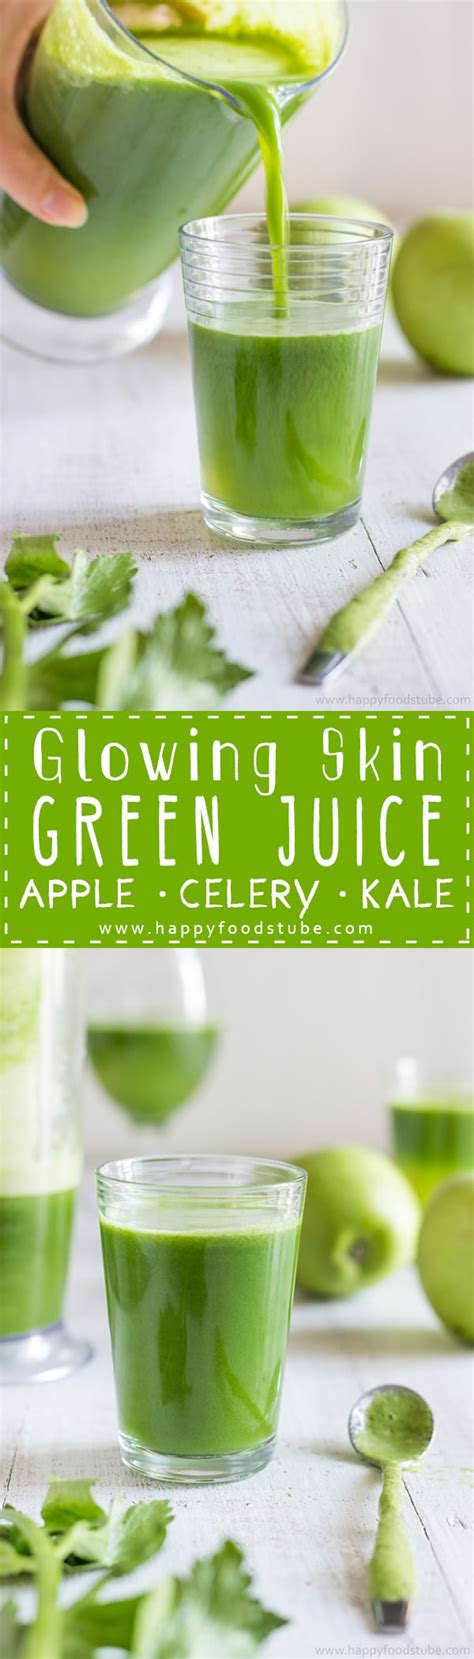 Fresh healthy juices recipes includes apple cucumber juice, carrot and red pepper juice, ginger and lemon cup, melon and papaya tango etc. Glowing Skin Green Juice Recipe - Happy Foods Tube